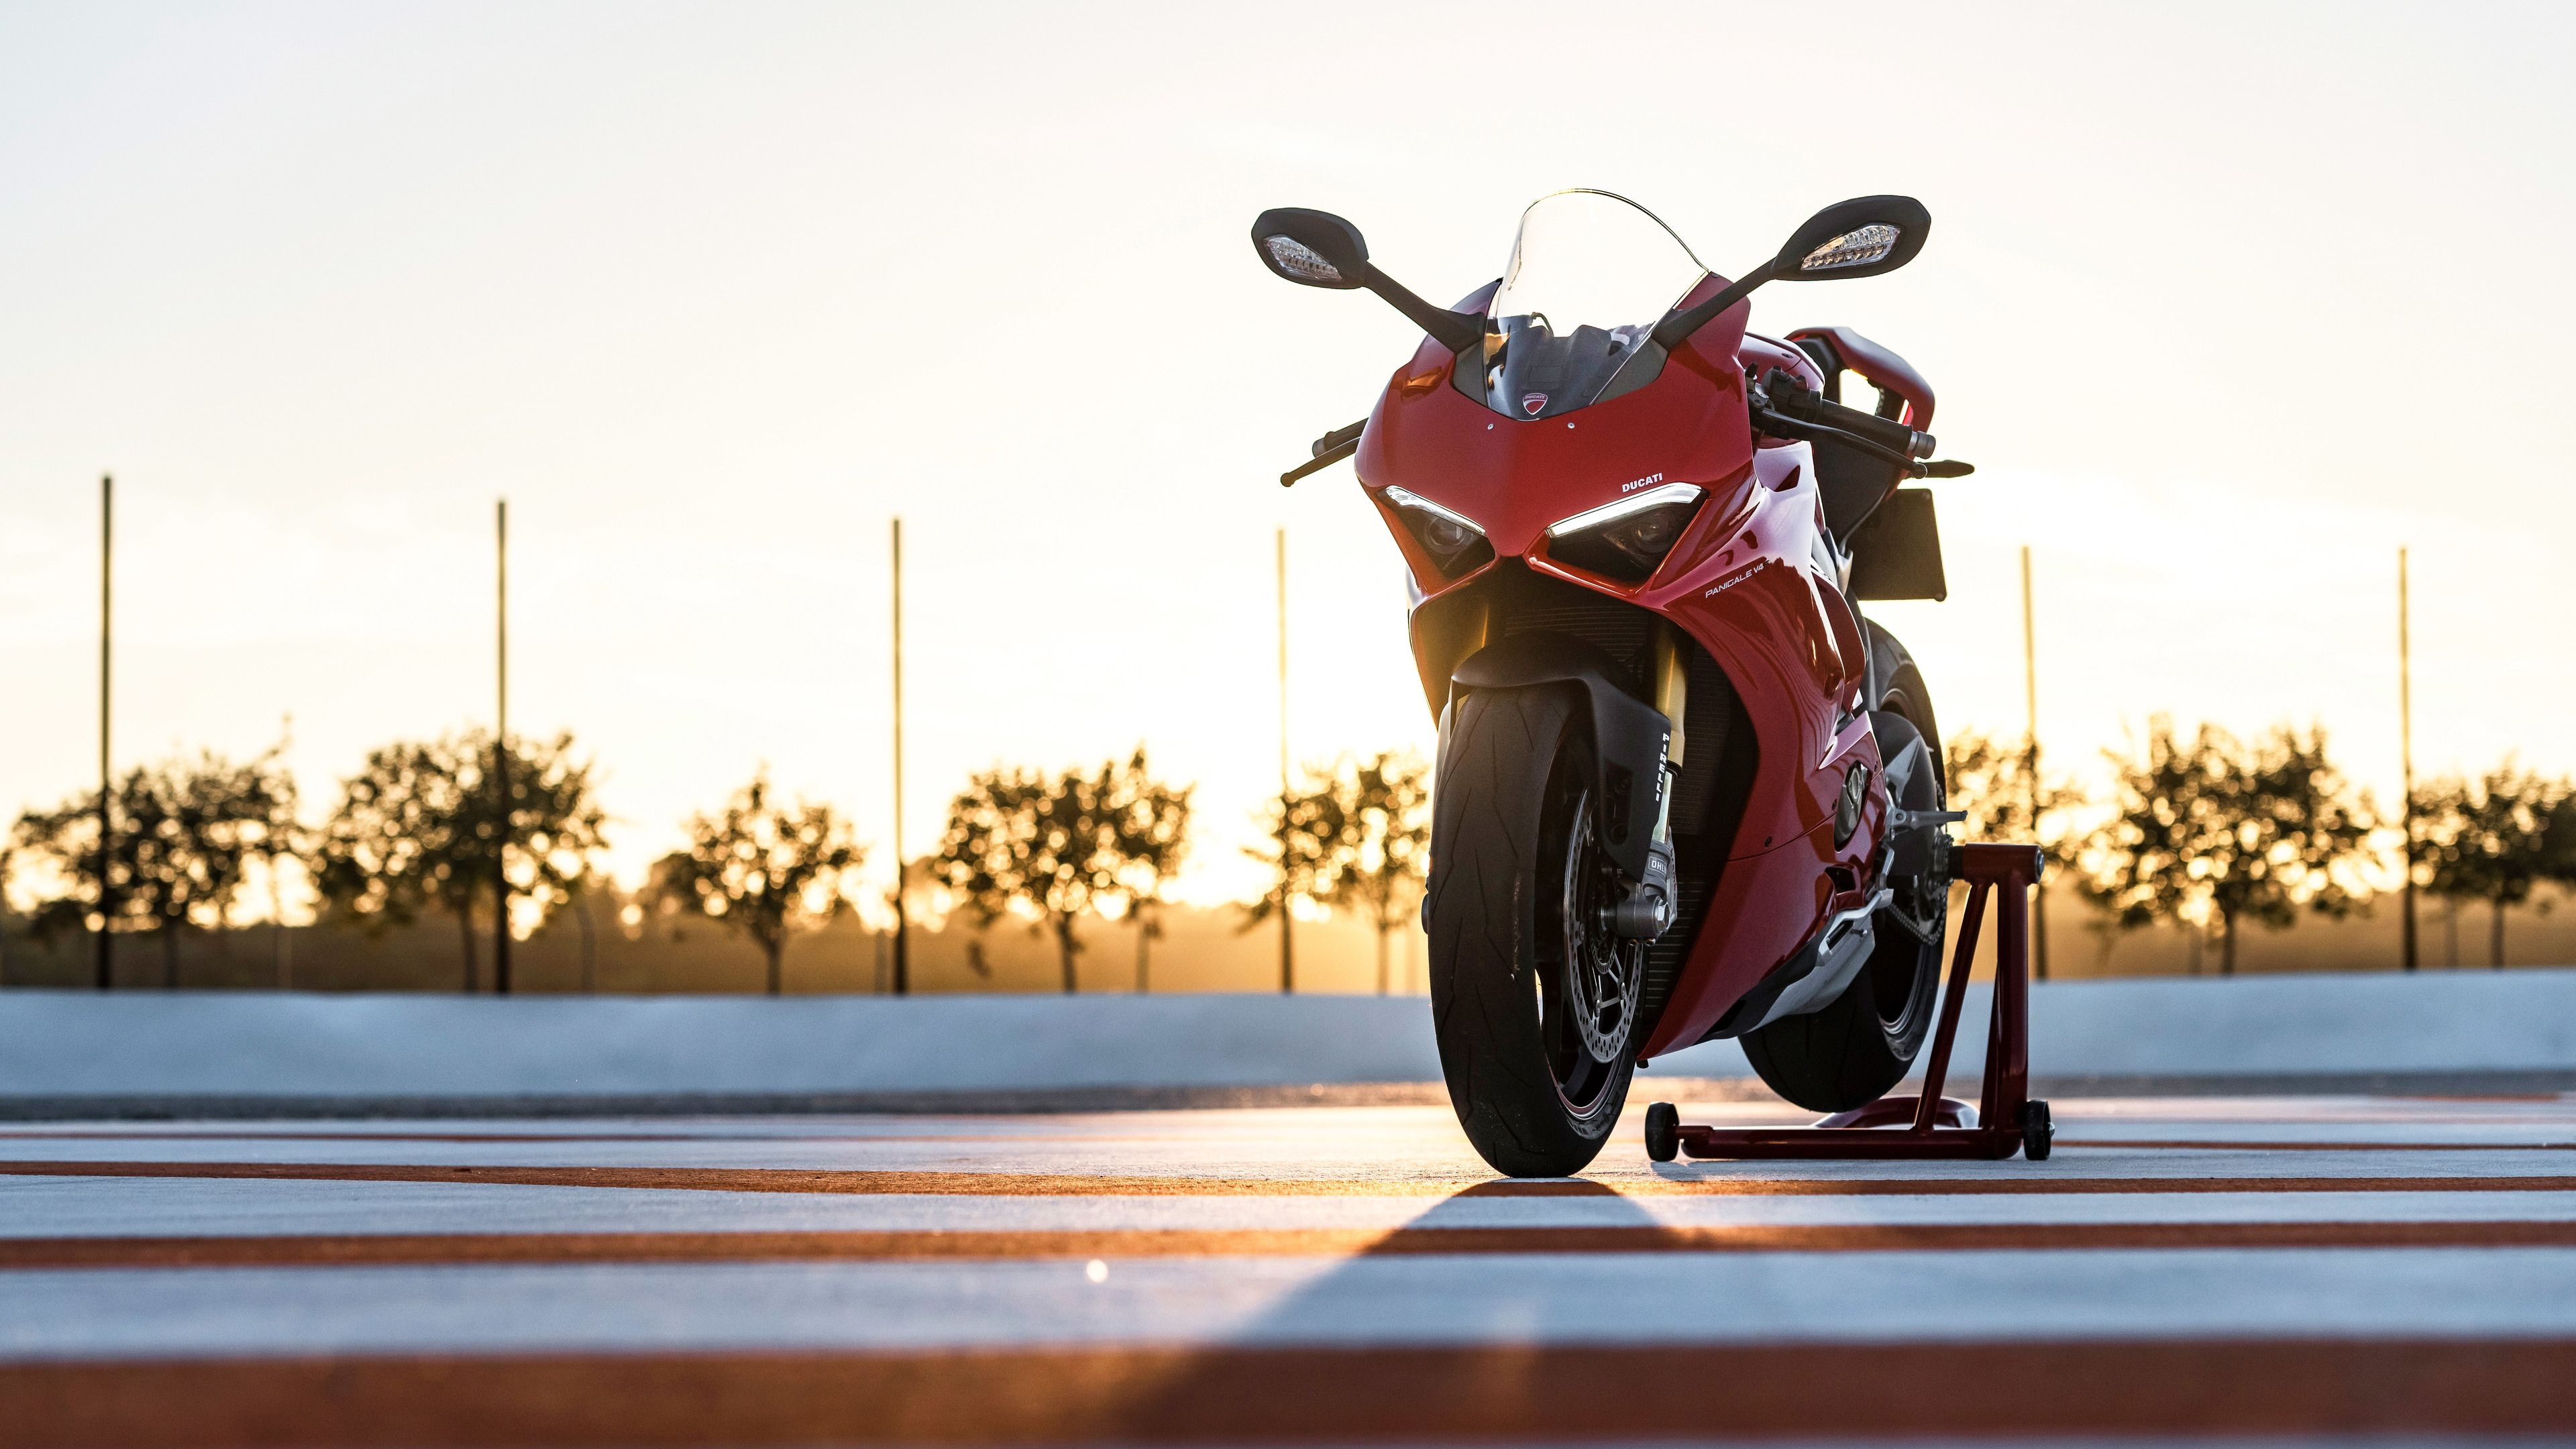 Superbike: Ducati Panigale V4, Ducati's first large-production street bike with a V4 engine. 3840x2160 4K Wallpaper.